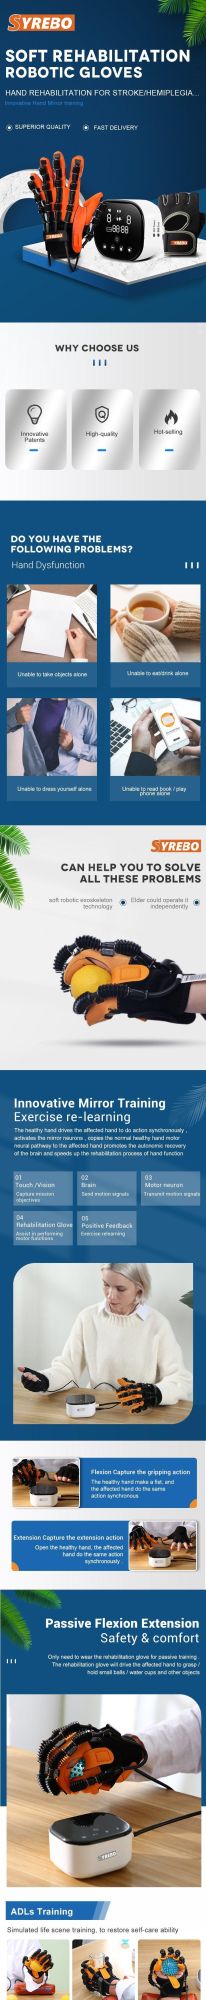 Hand Robot Glove Rehab Physiotherapy Equipment Finger Recovery Hot Sale Stroke Hand Dysfunction Occupational Therapy Massager